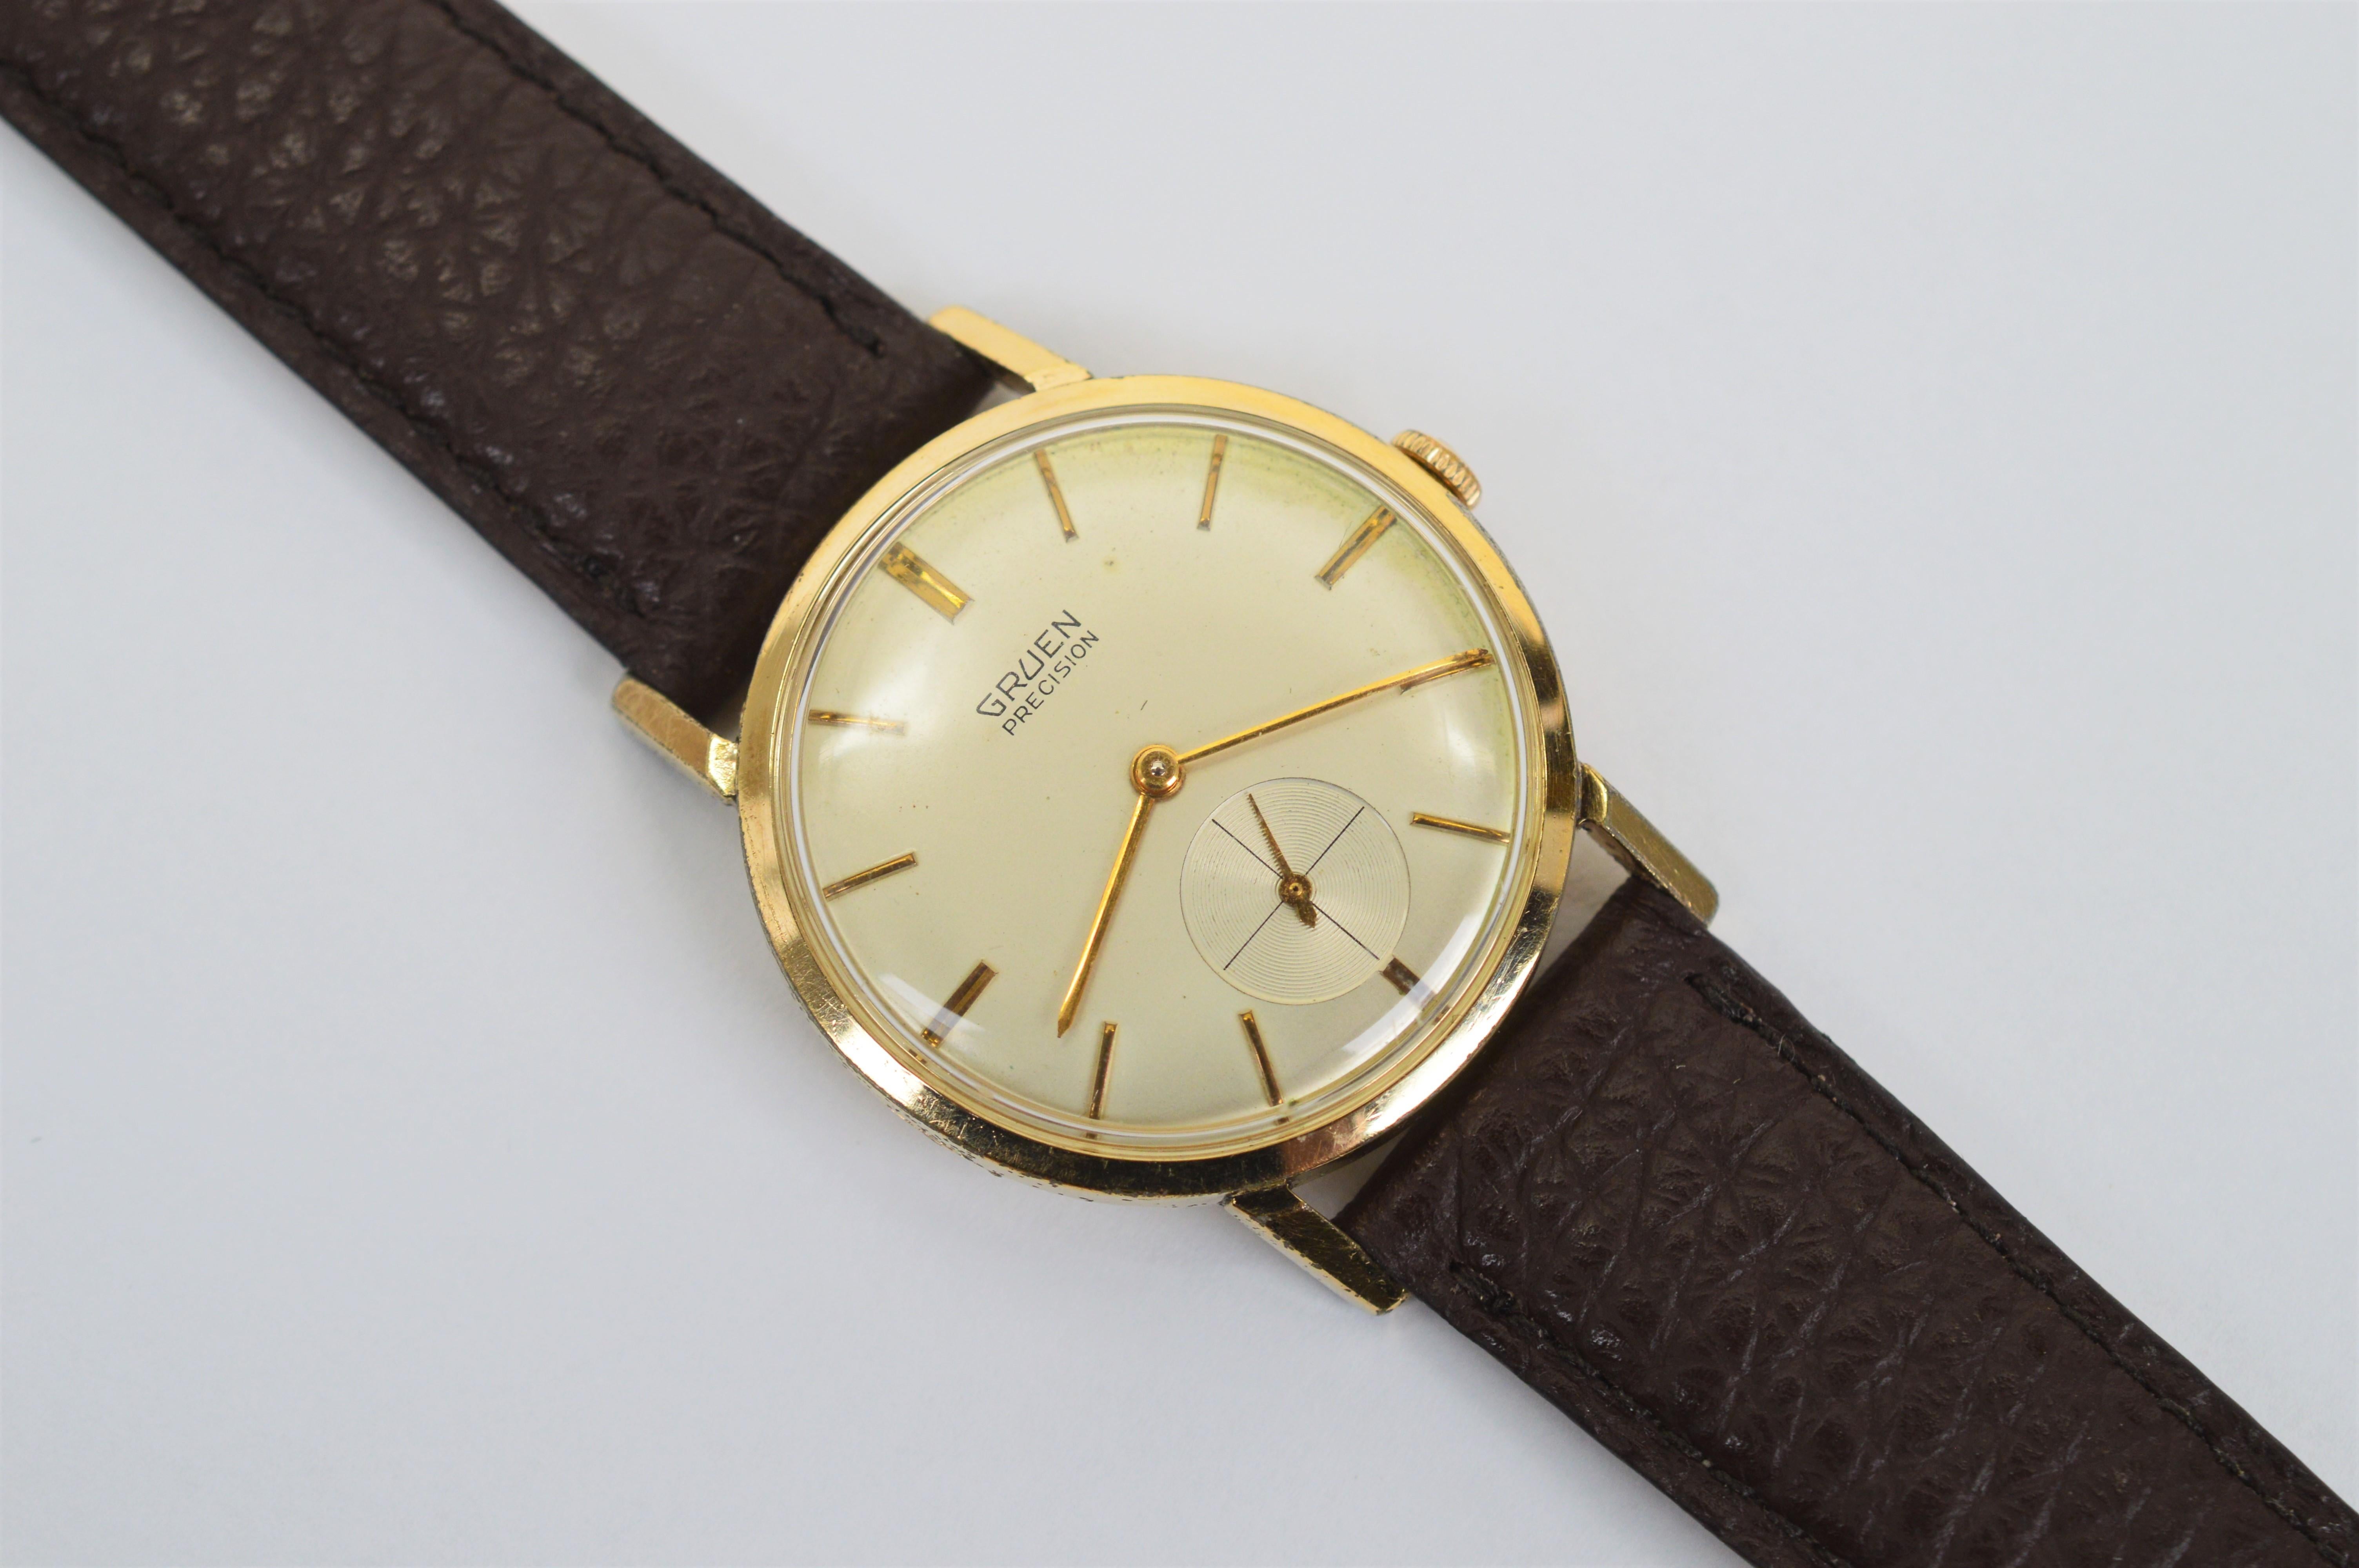 With interesting provenance, this 1960s timepiece was presented to a police officer in recognition of service for New York's 90th precinct October 1962. This Gruen Calibre design is the same model type that Sean Connery wore in the 1962 James Bond